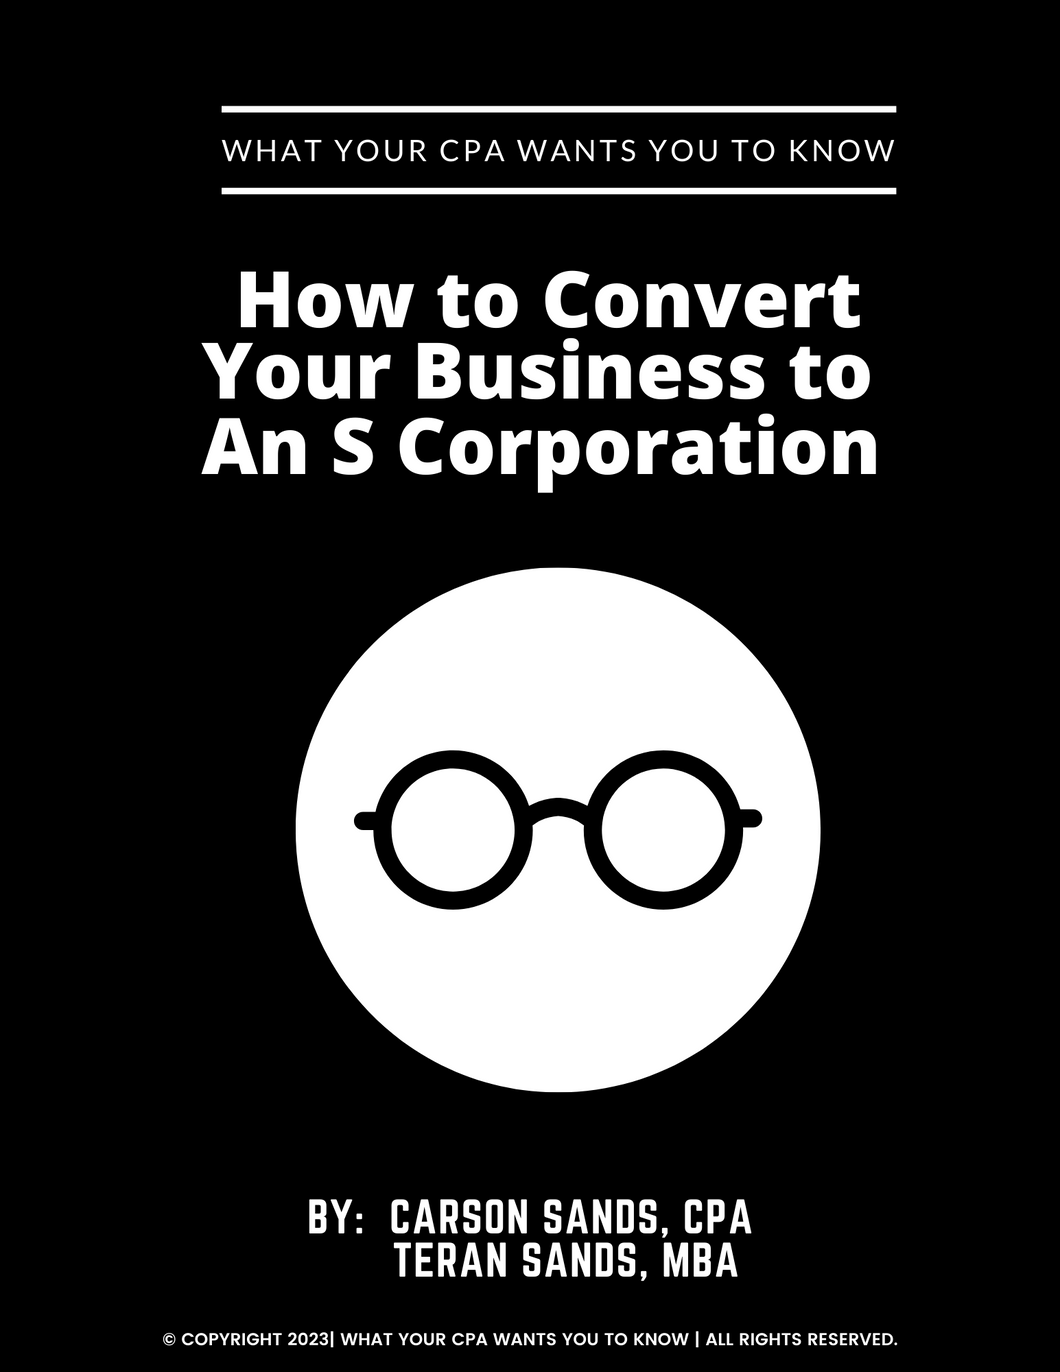 How to Convert Your Business to an S Corp